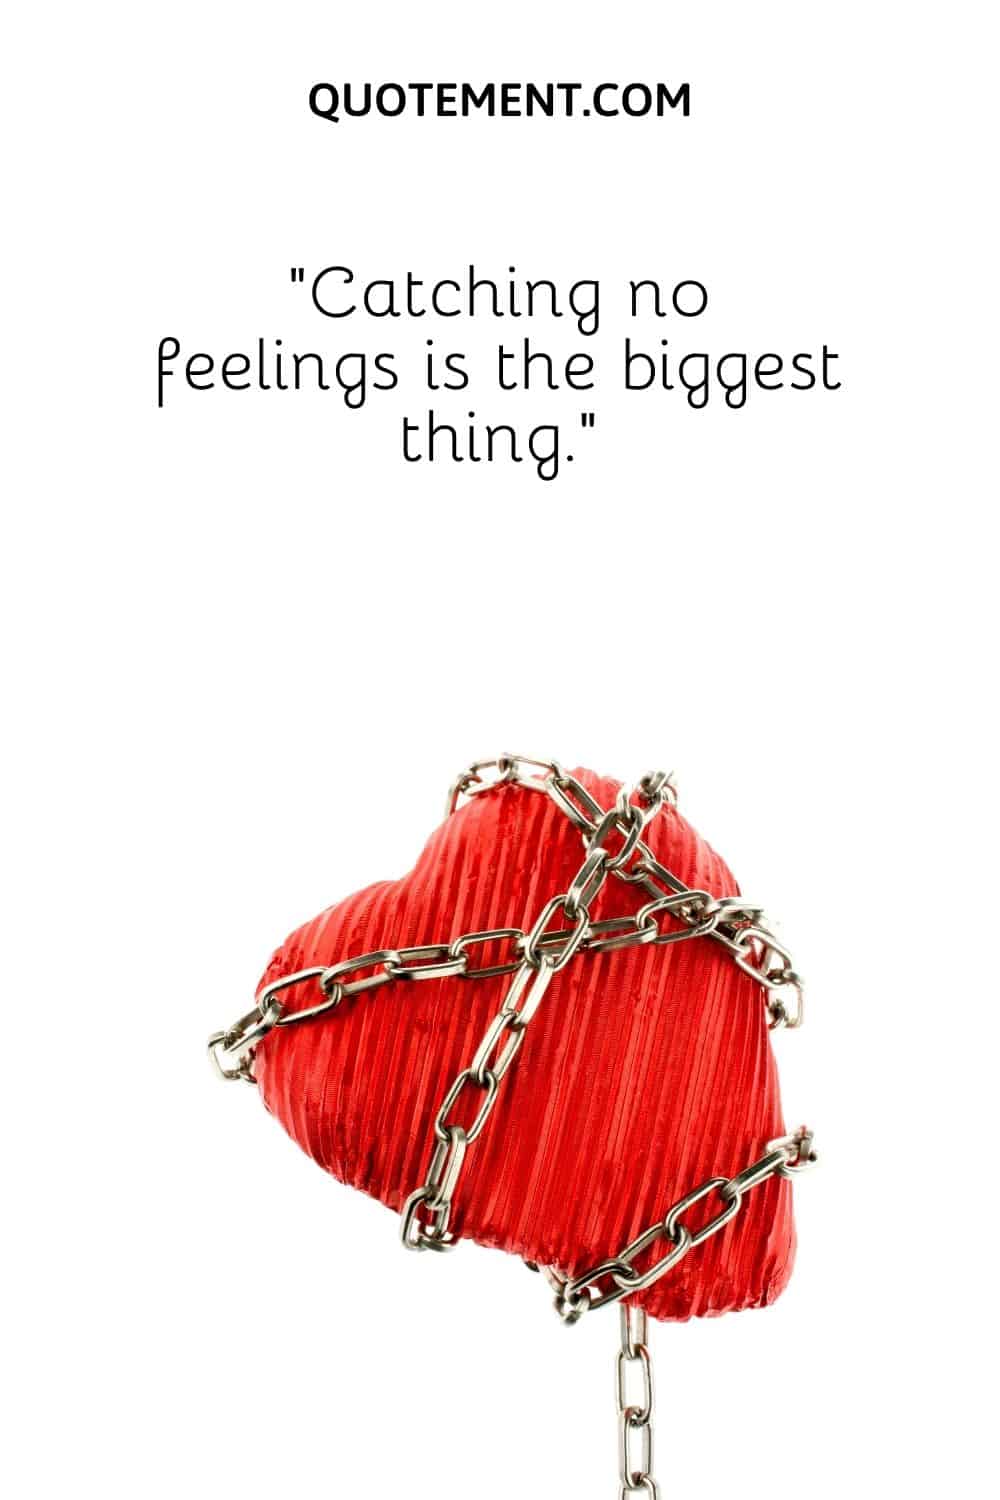 “Catching no feelings is the biggest thing.”